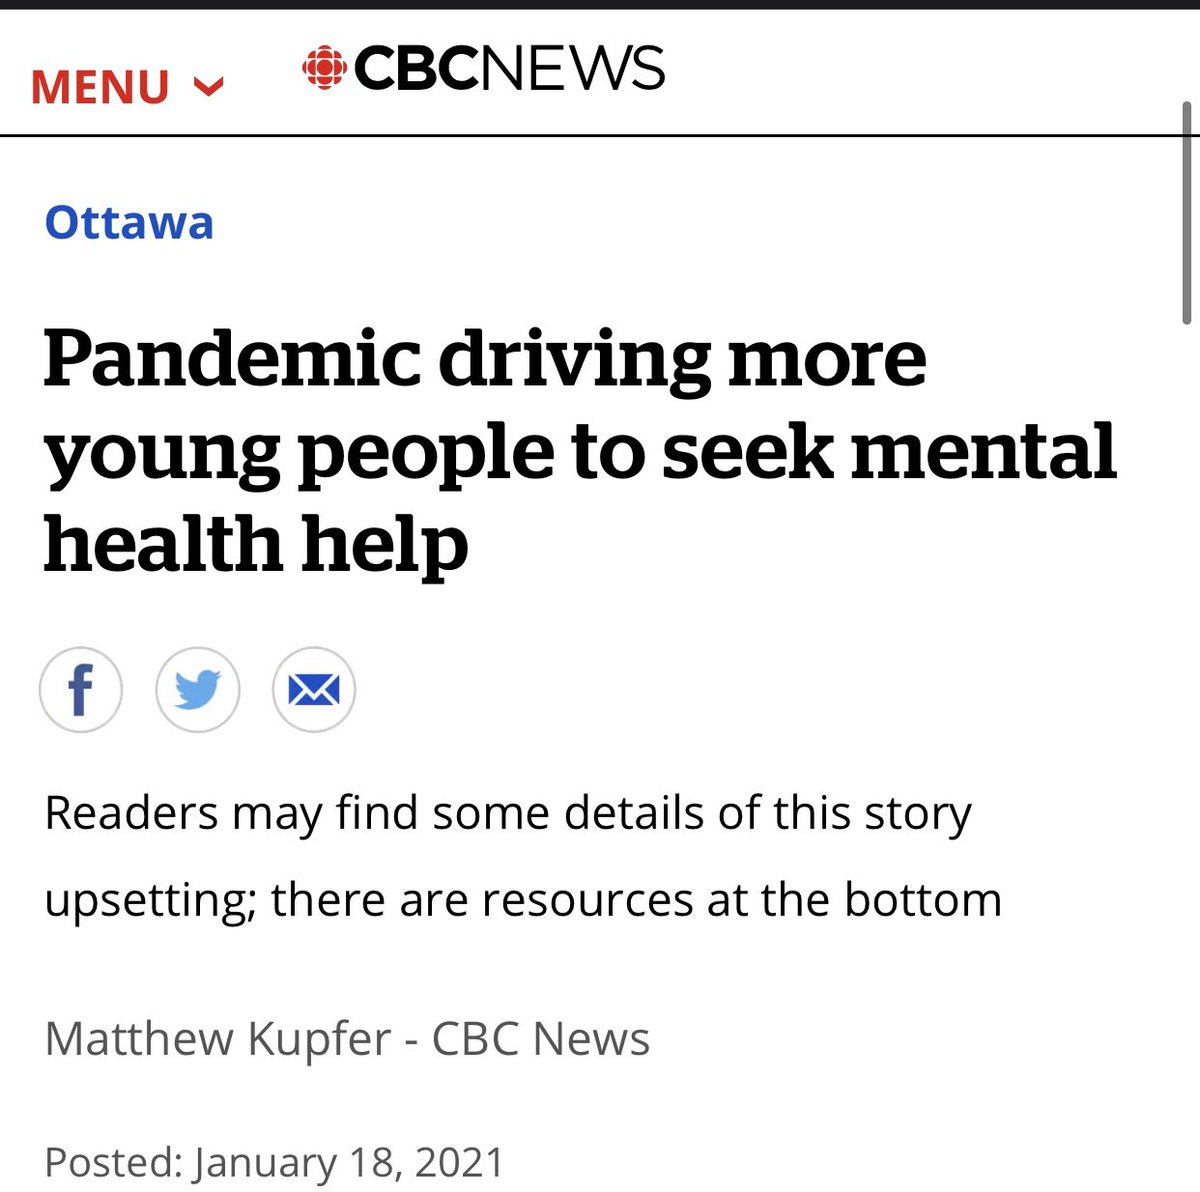 8/ Our children & the young are unnecessarily hurting, their mental & physical health is in ruins, & the effect on their development might have long lasting consequences. They do not deserve this  #KidsCantWait  #COVID19  #Canada  #Ontario  #cdnpoli  #onpoli  #lockdown